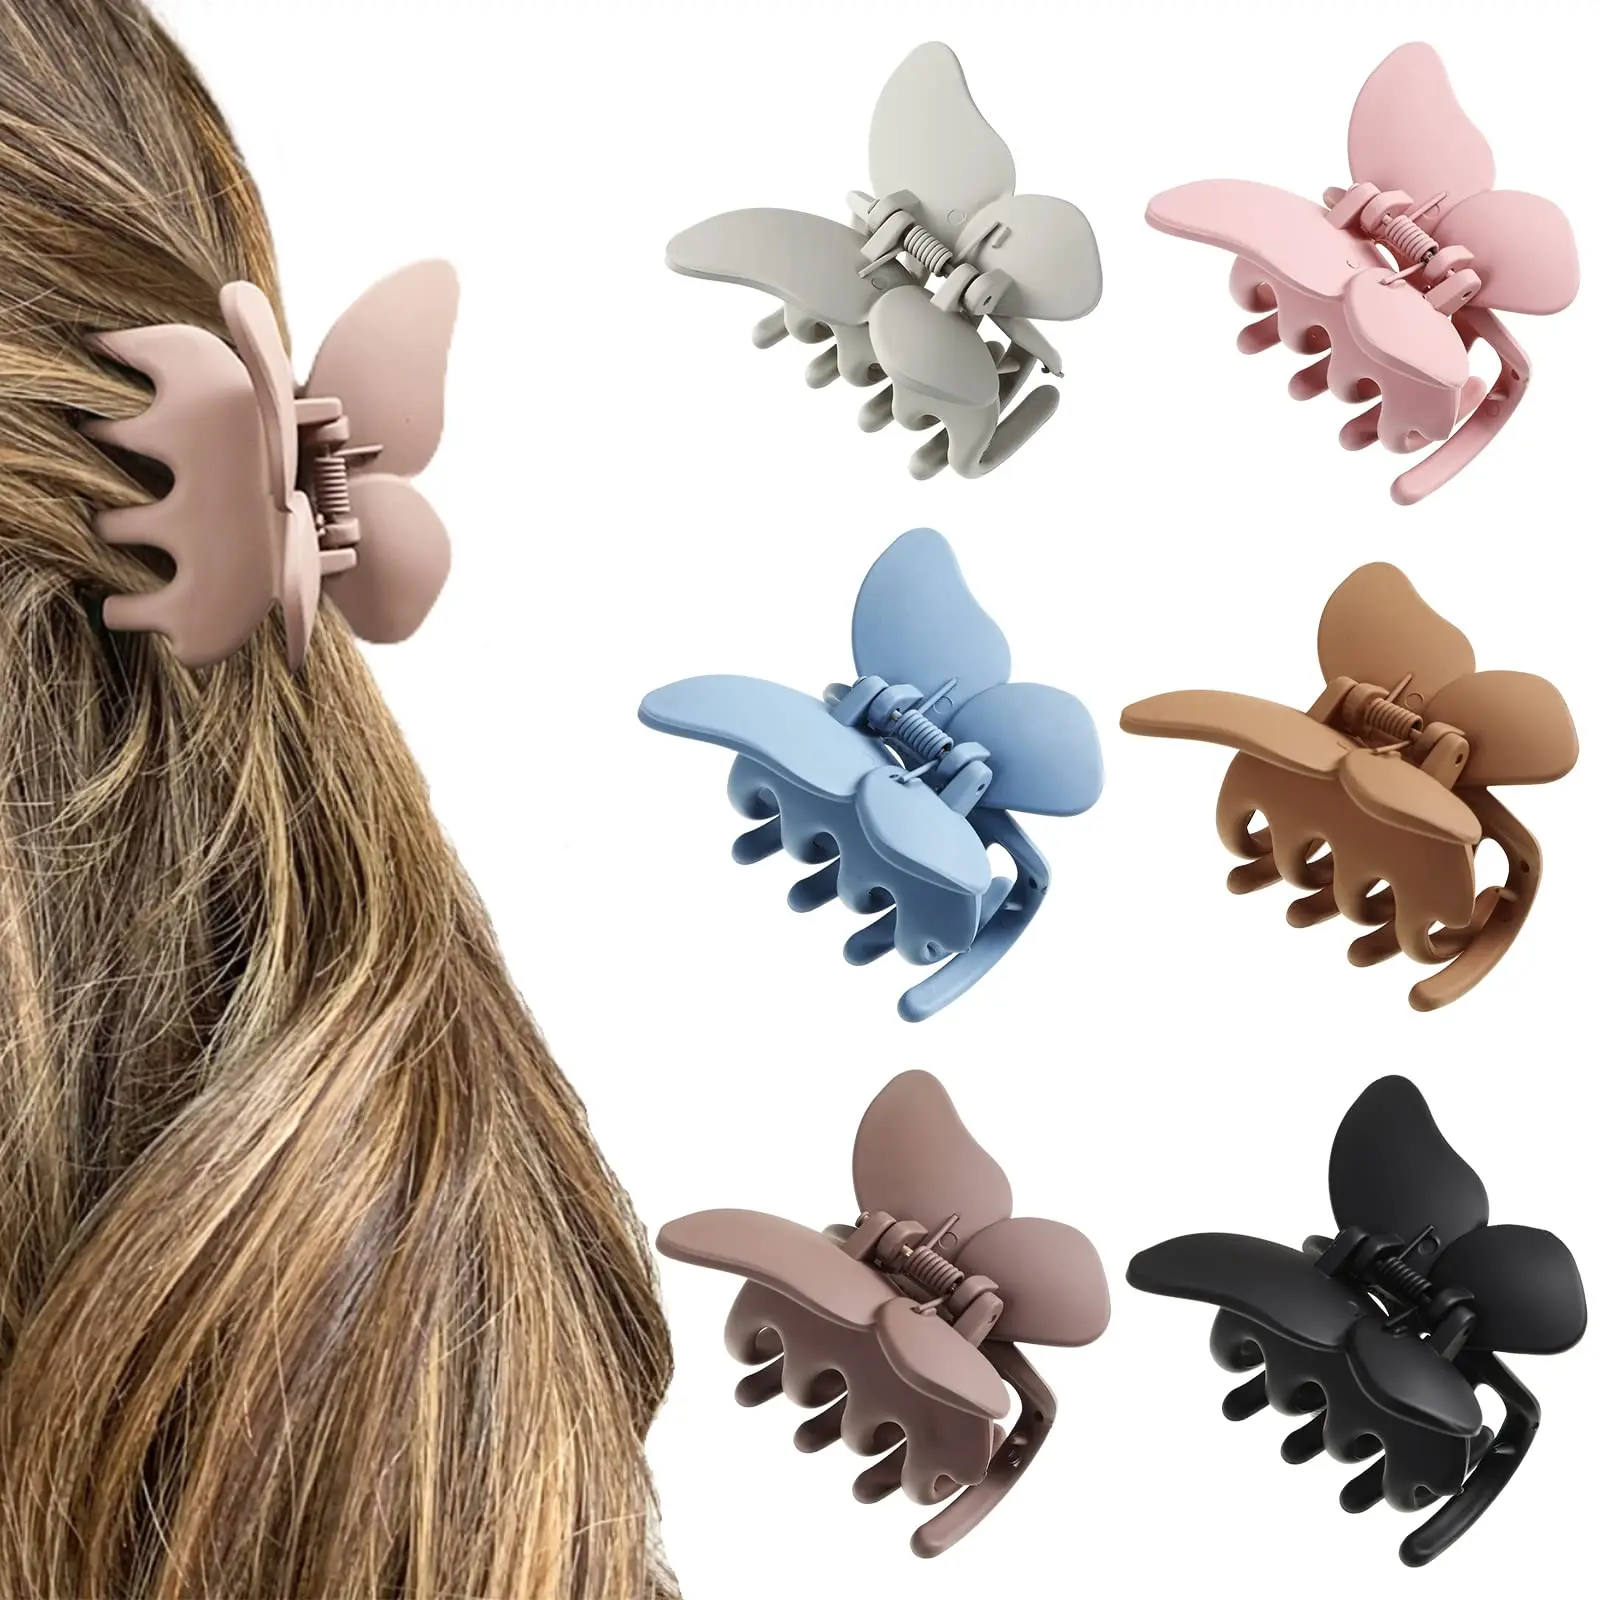 2 Pcs Korean Fashion Women Beautiful Color Butterfly Hair Claw Clips US SELLER 